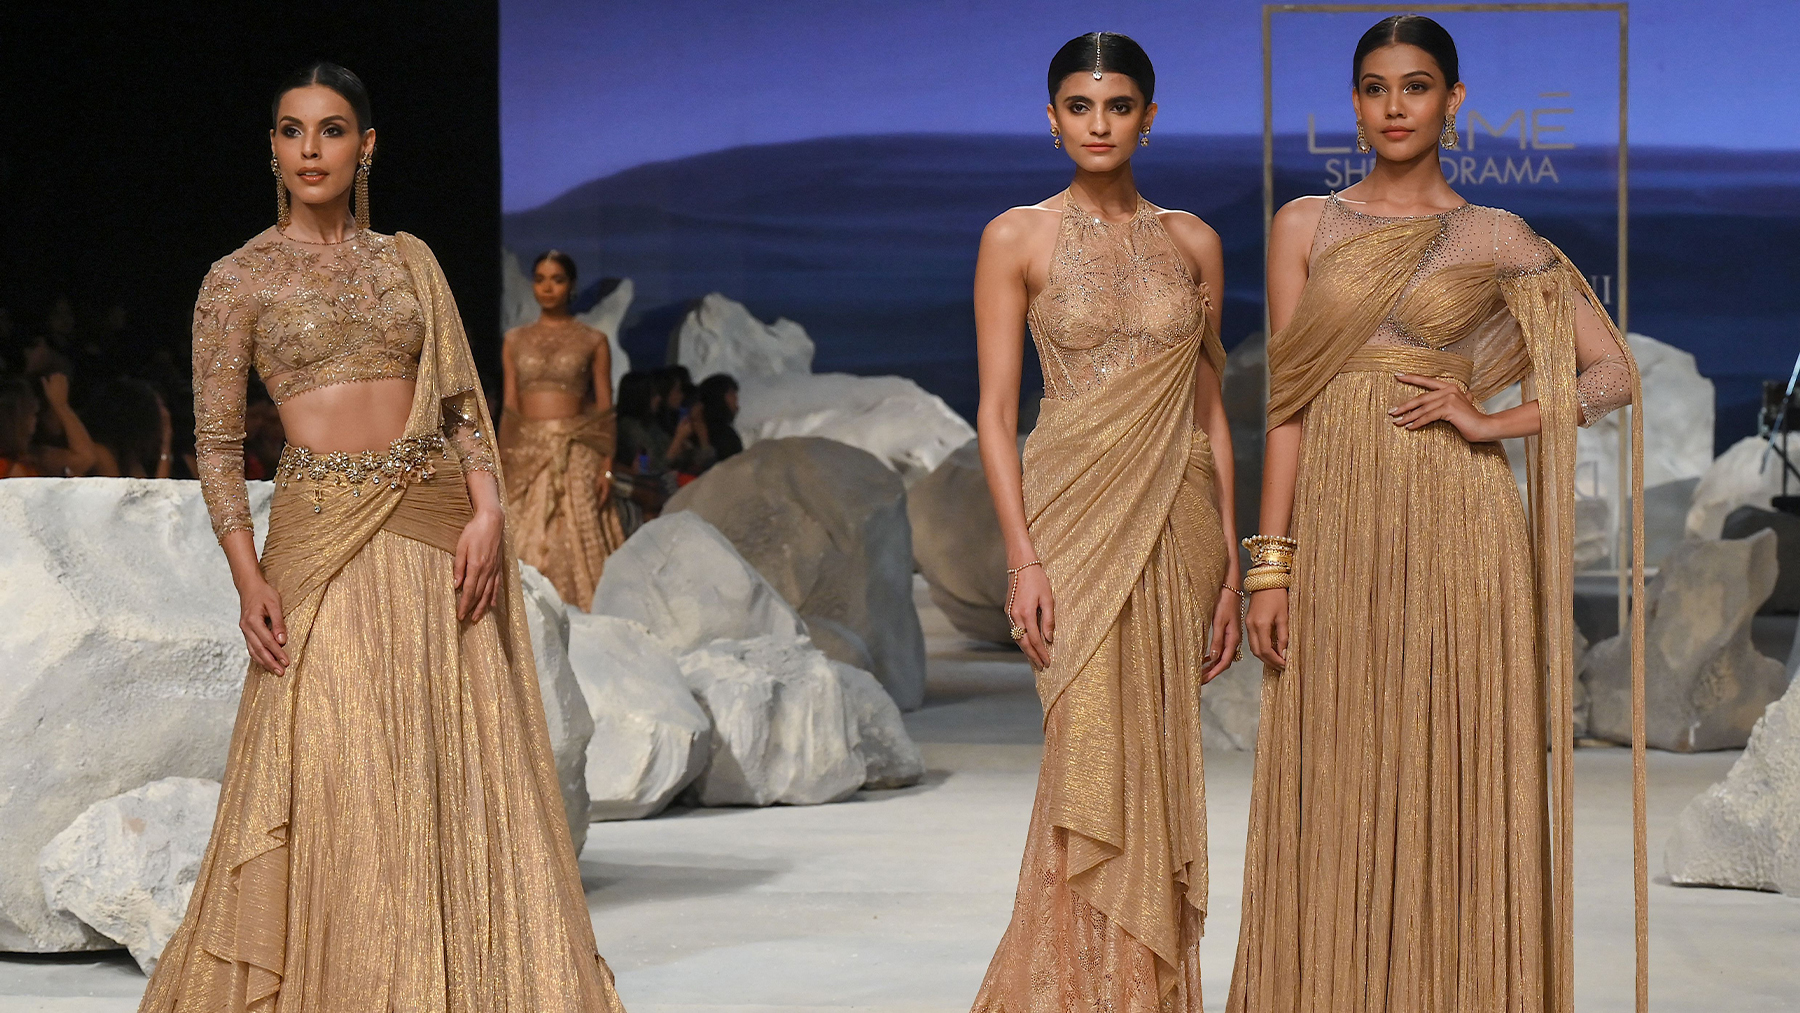 Insights on Luxury & Culture from 'Fashion Forward' held at DLF Emporio